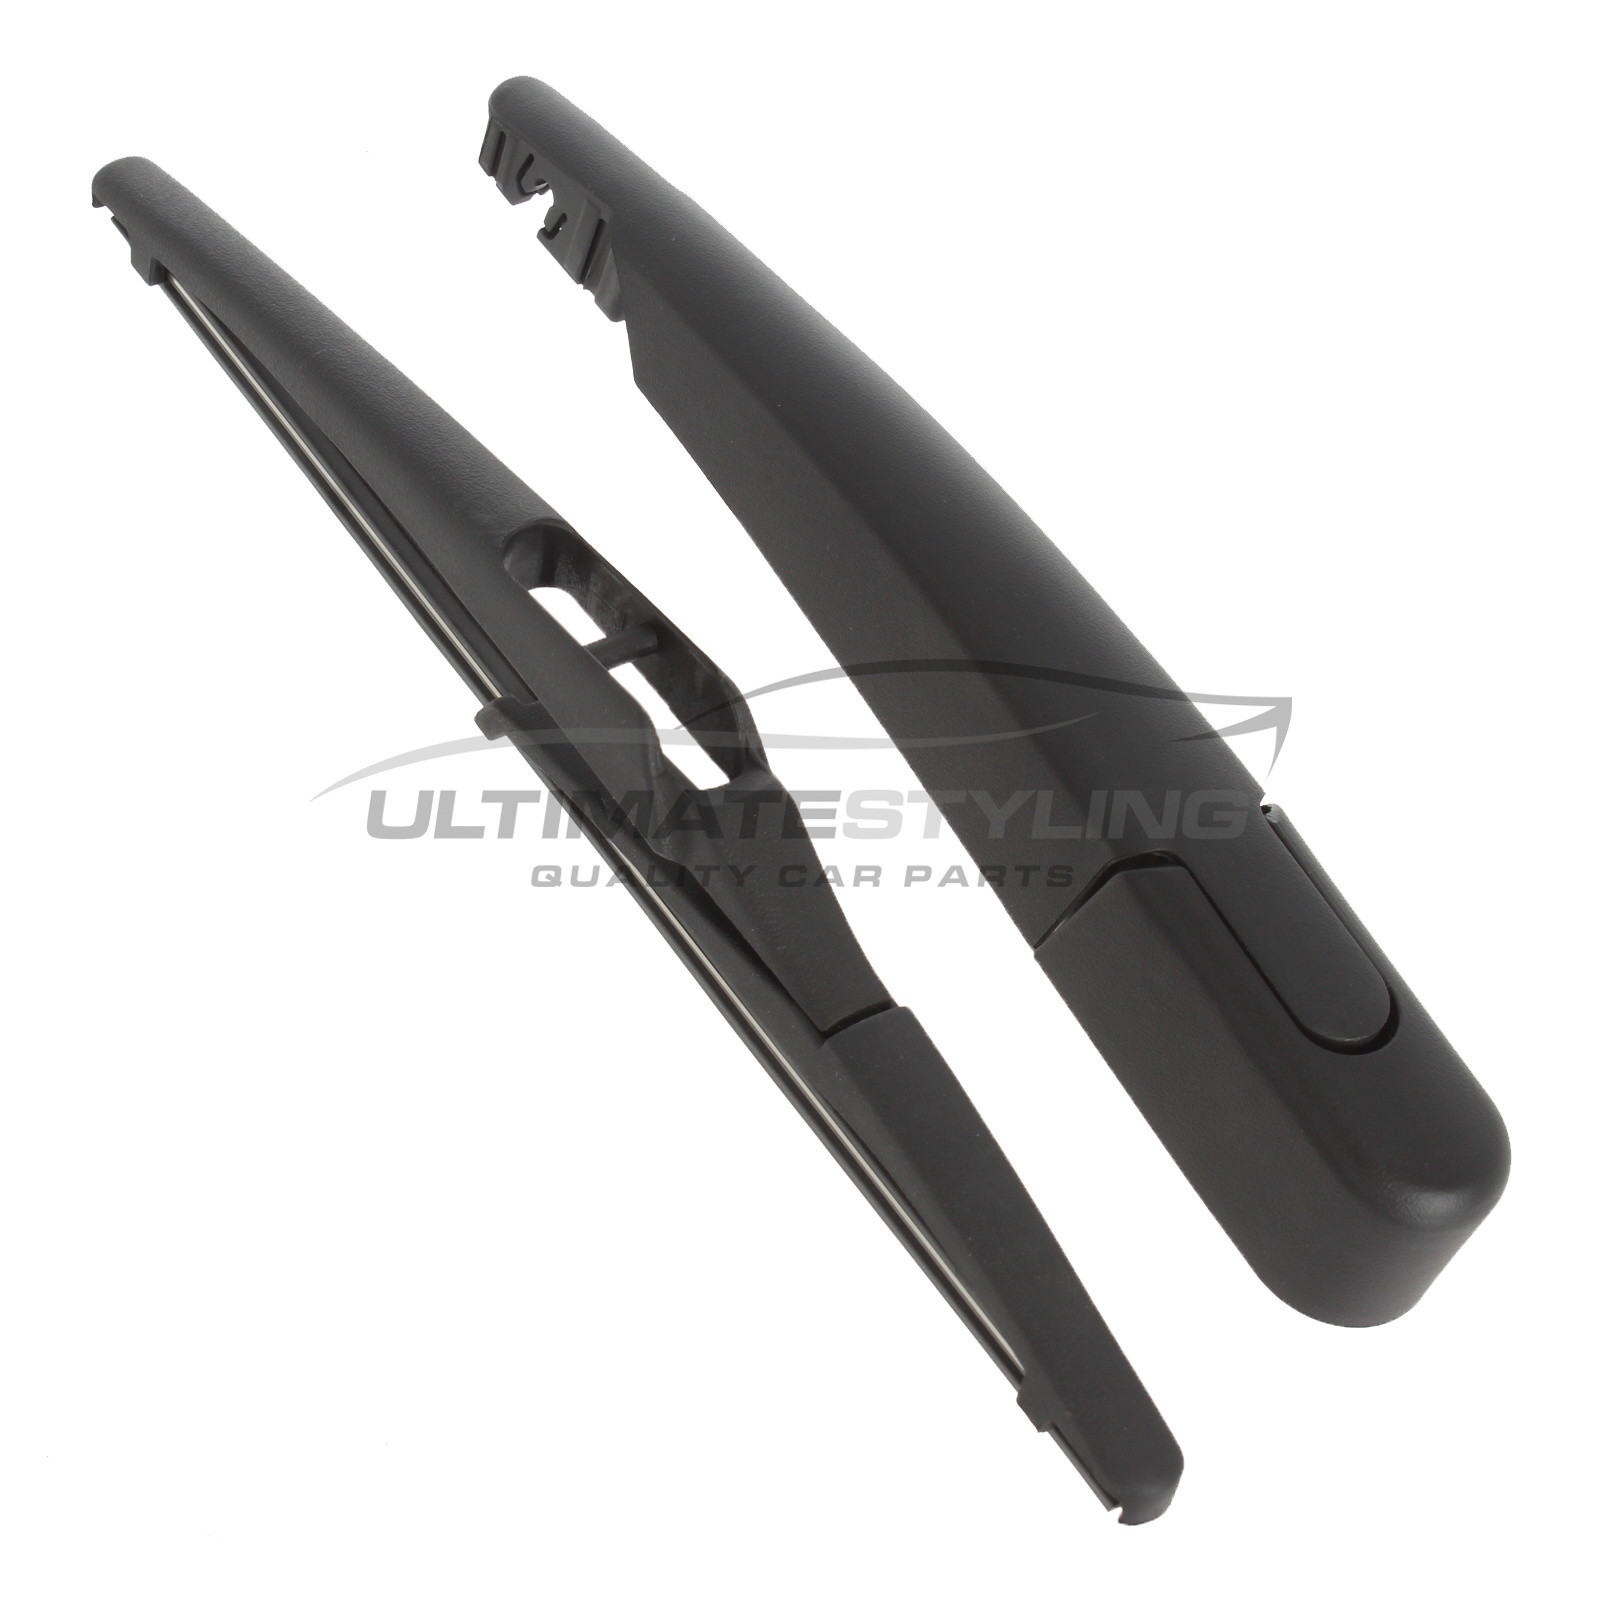 Rear Wiper Arm & Blade Set for Smart Forfour